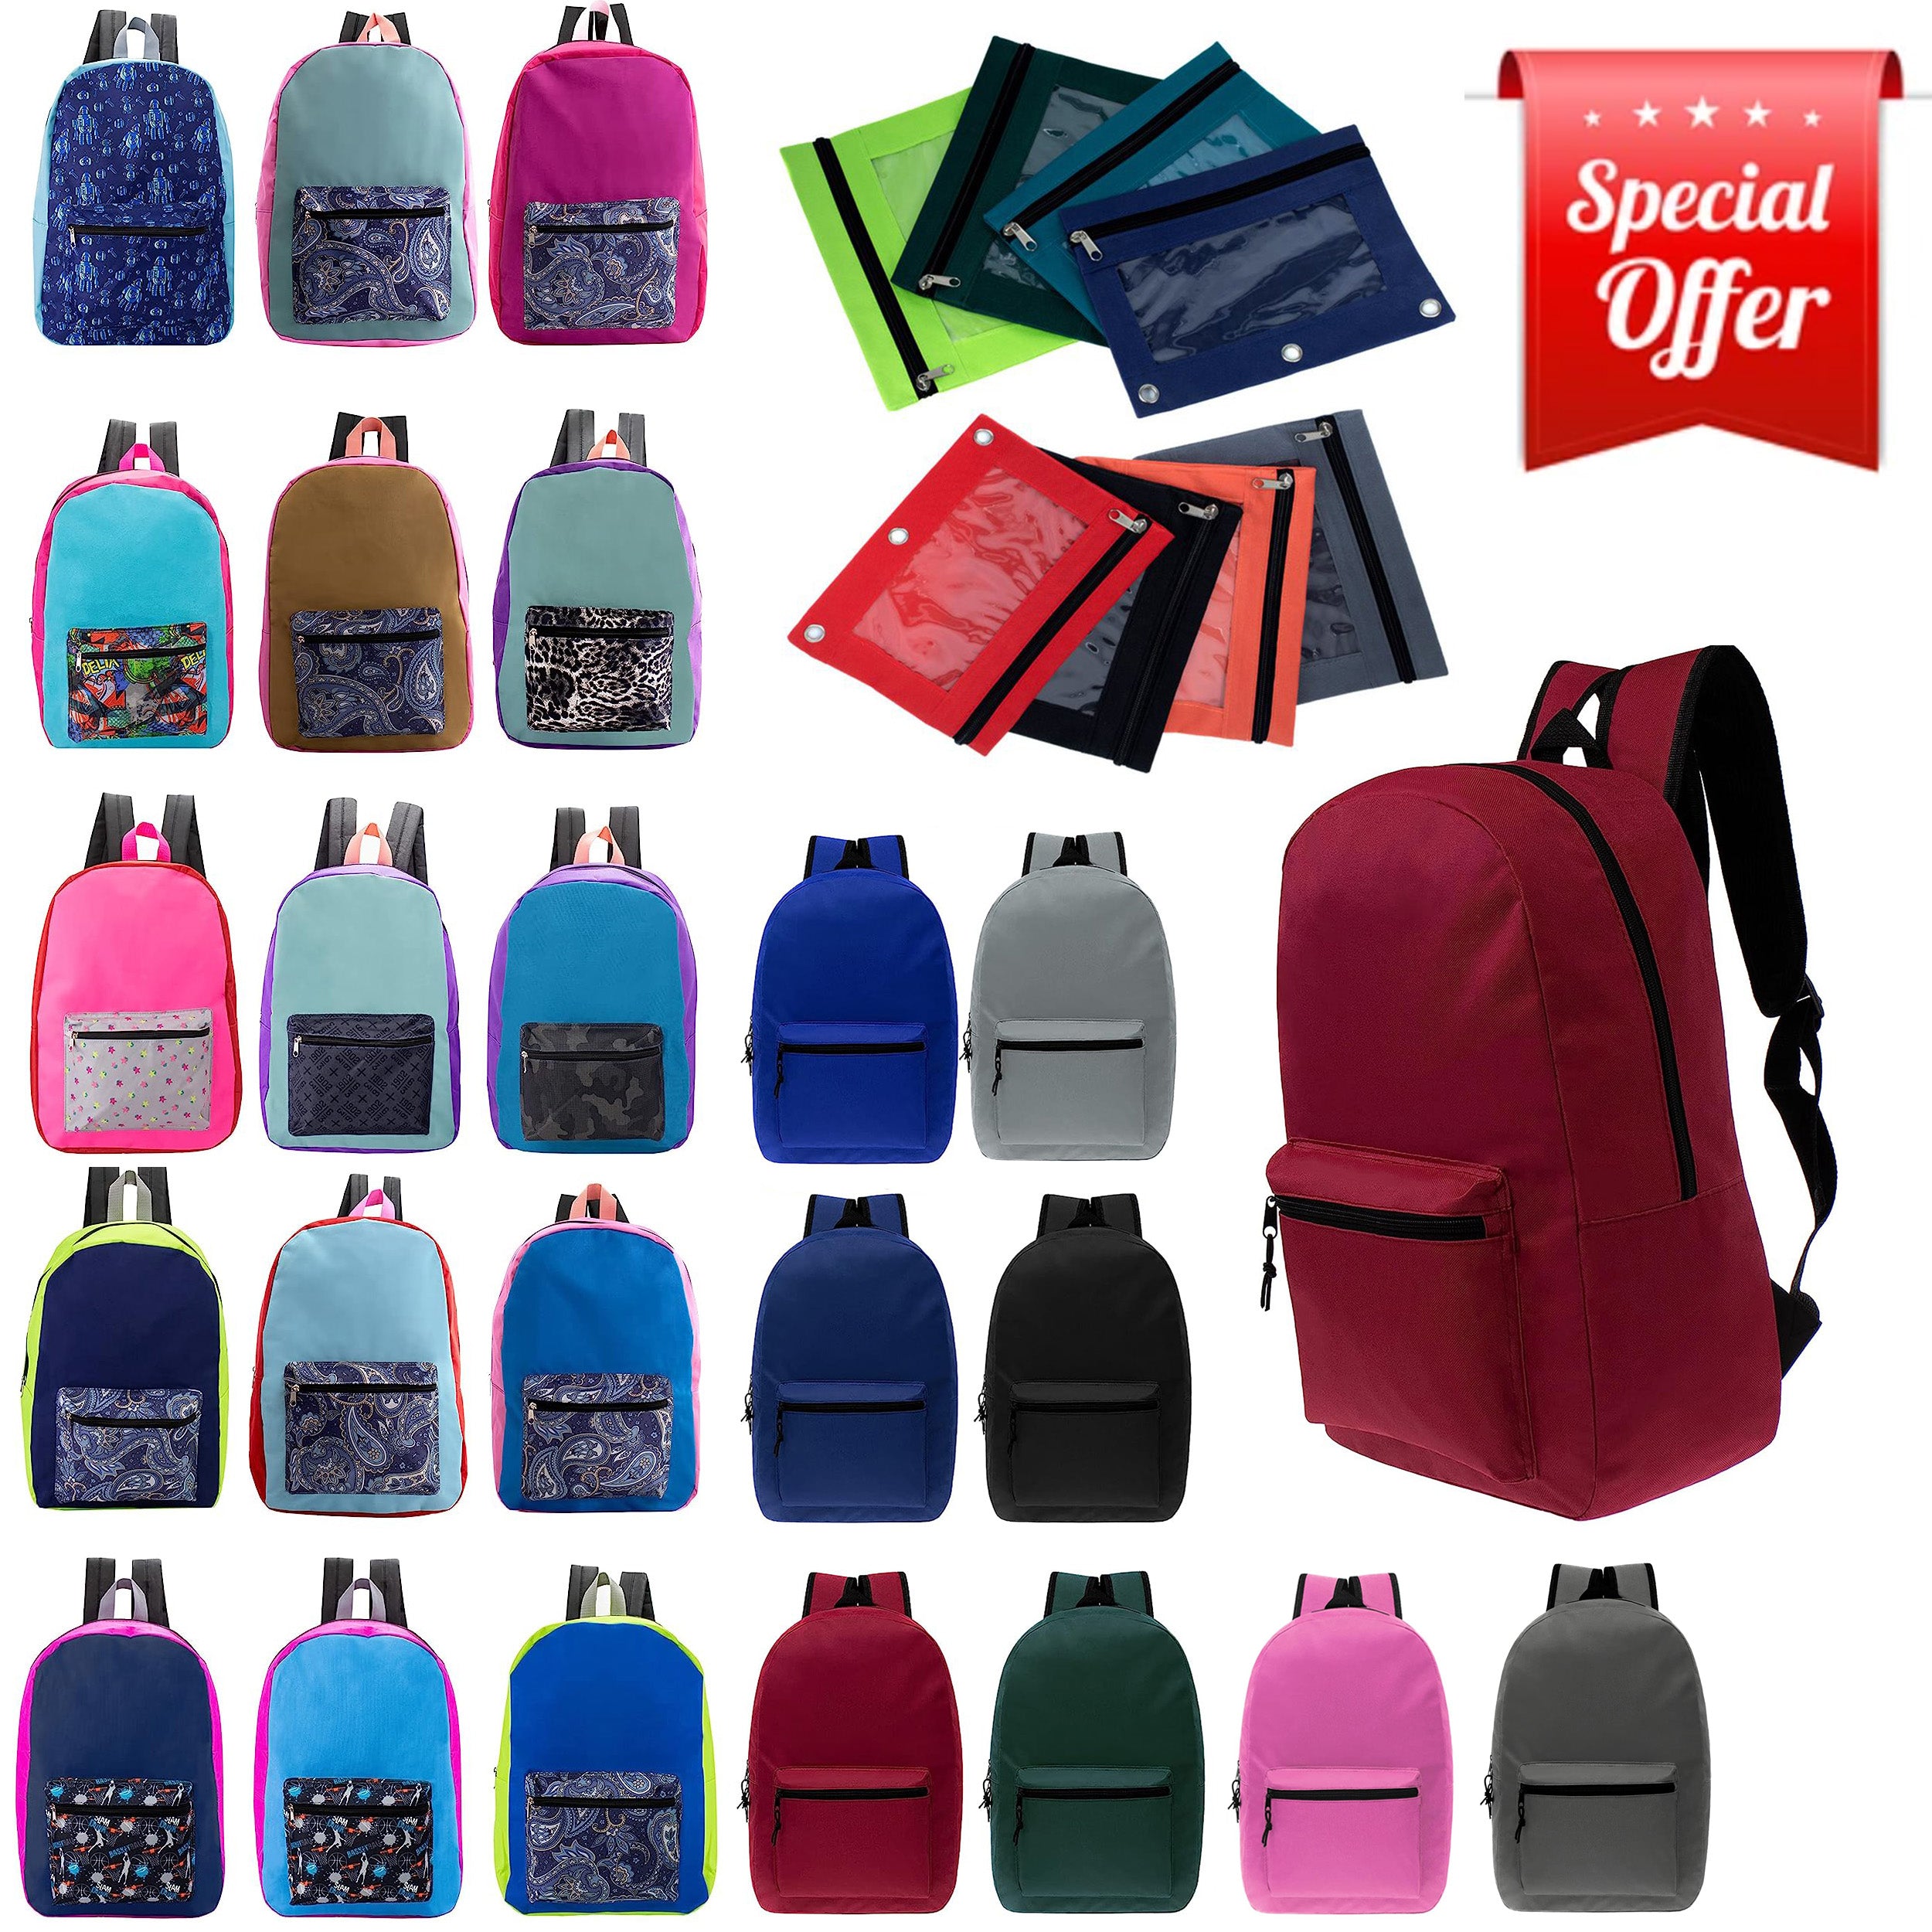 17" Kids Basic Wholesale Combo Set Of Backpack in Assorted Colors and Prints - Bulk Case of 60 Free Pencil Pouch Included